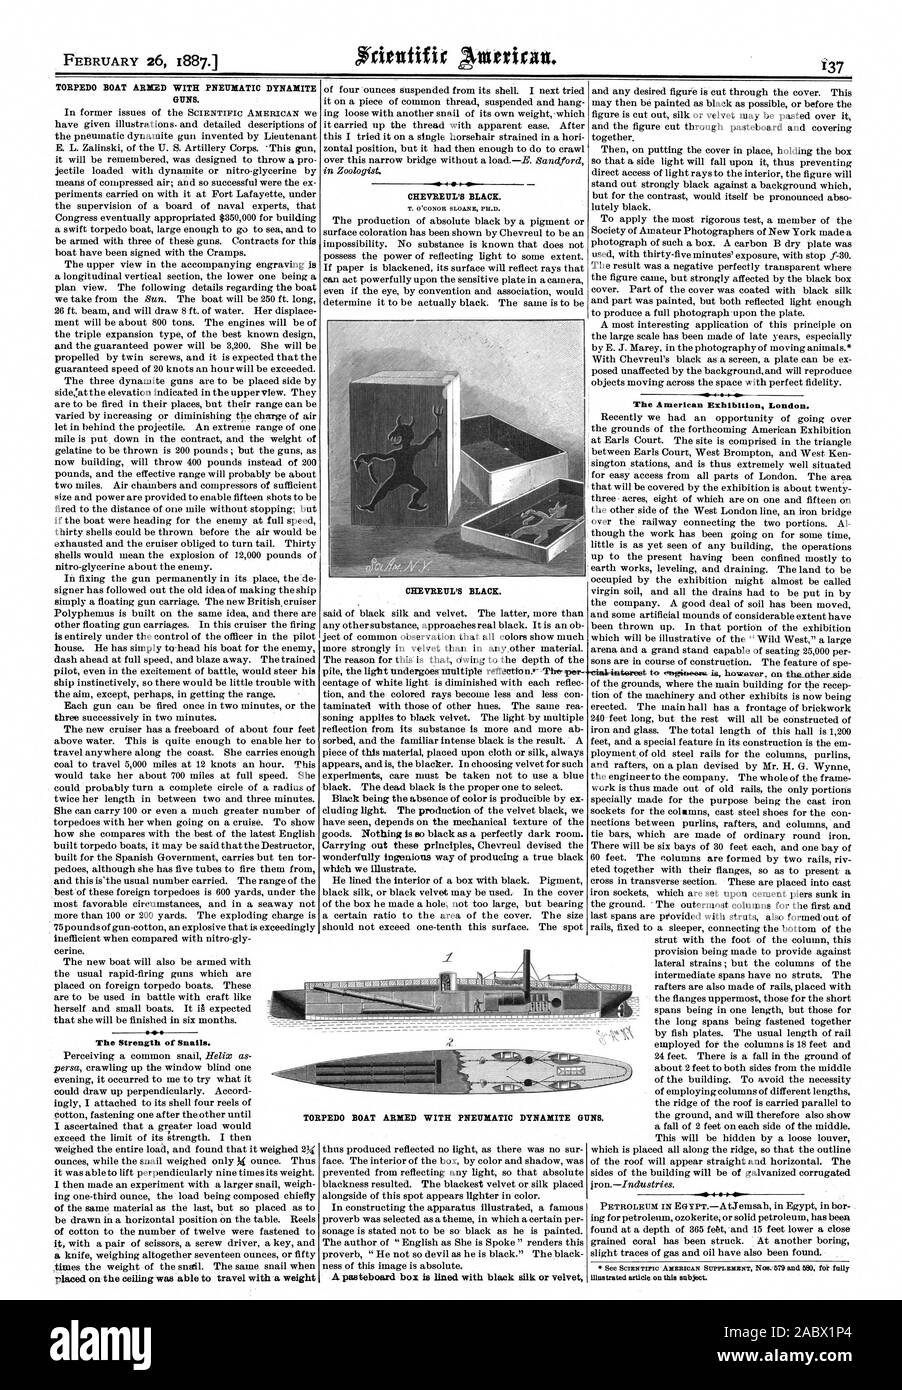 TORPEDO BOAT ARMED WITH PNEUMATIC DYNAMITE GUNS. -40. The Strength of Snails. CHEVREUL'S BLACK. CILEVREUL'S BLACK. The American Exhibition London. TORPEDO BOAT ARMED WITH PNEUMATIC DYNAMITE GU NS., scientific american, 1887-02-26 Stock Photo